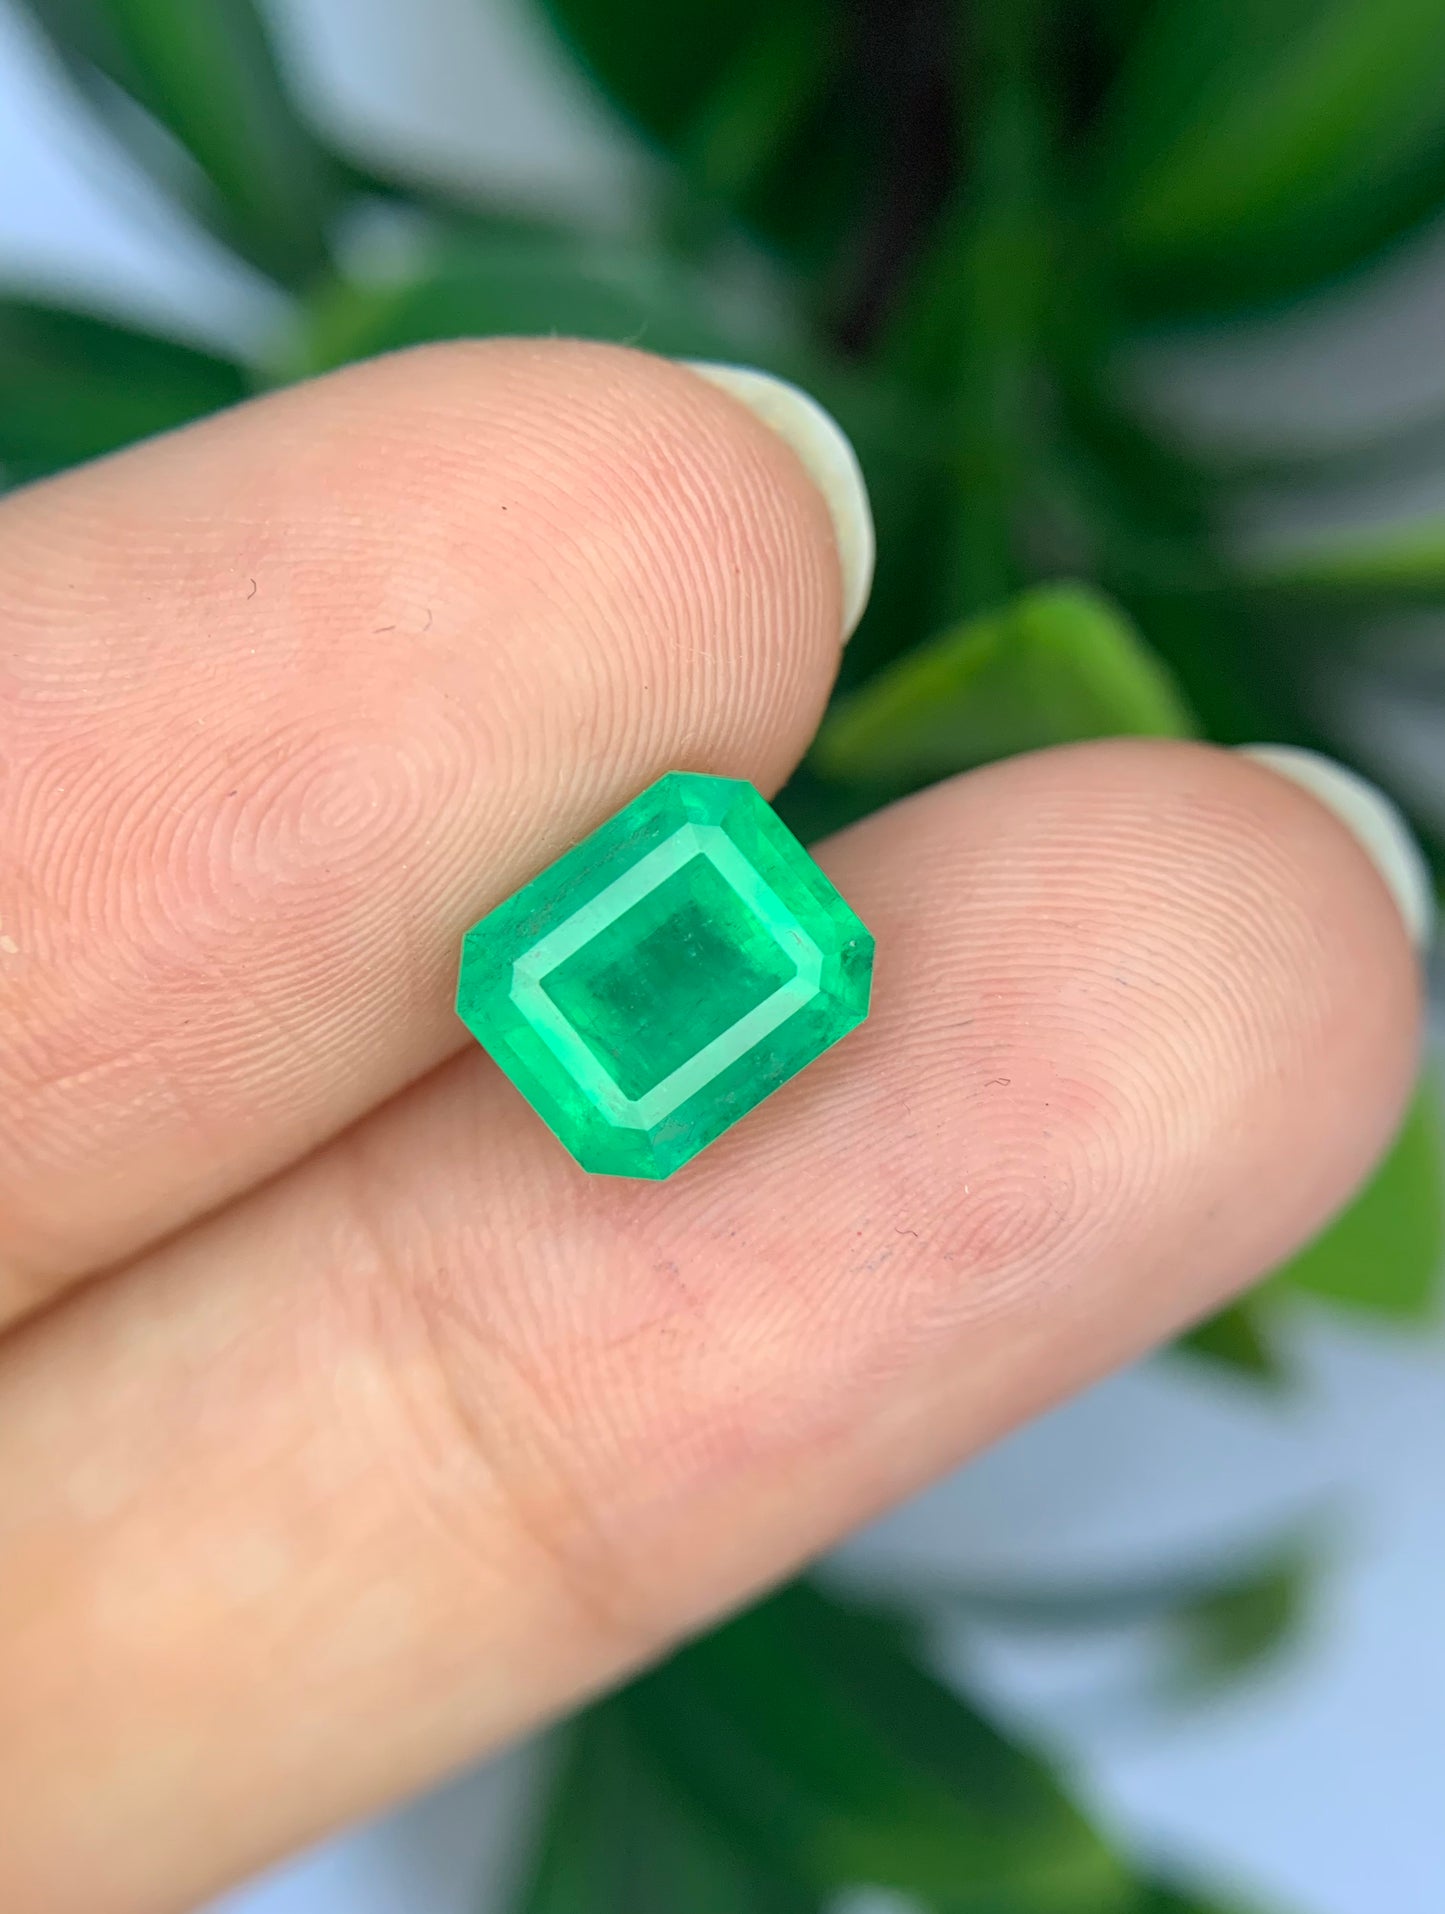 AIGS - 2.38 cts Vivid Green Colombian Emerald.